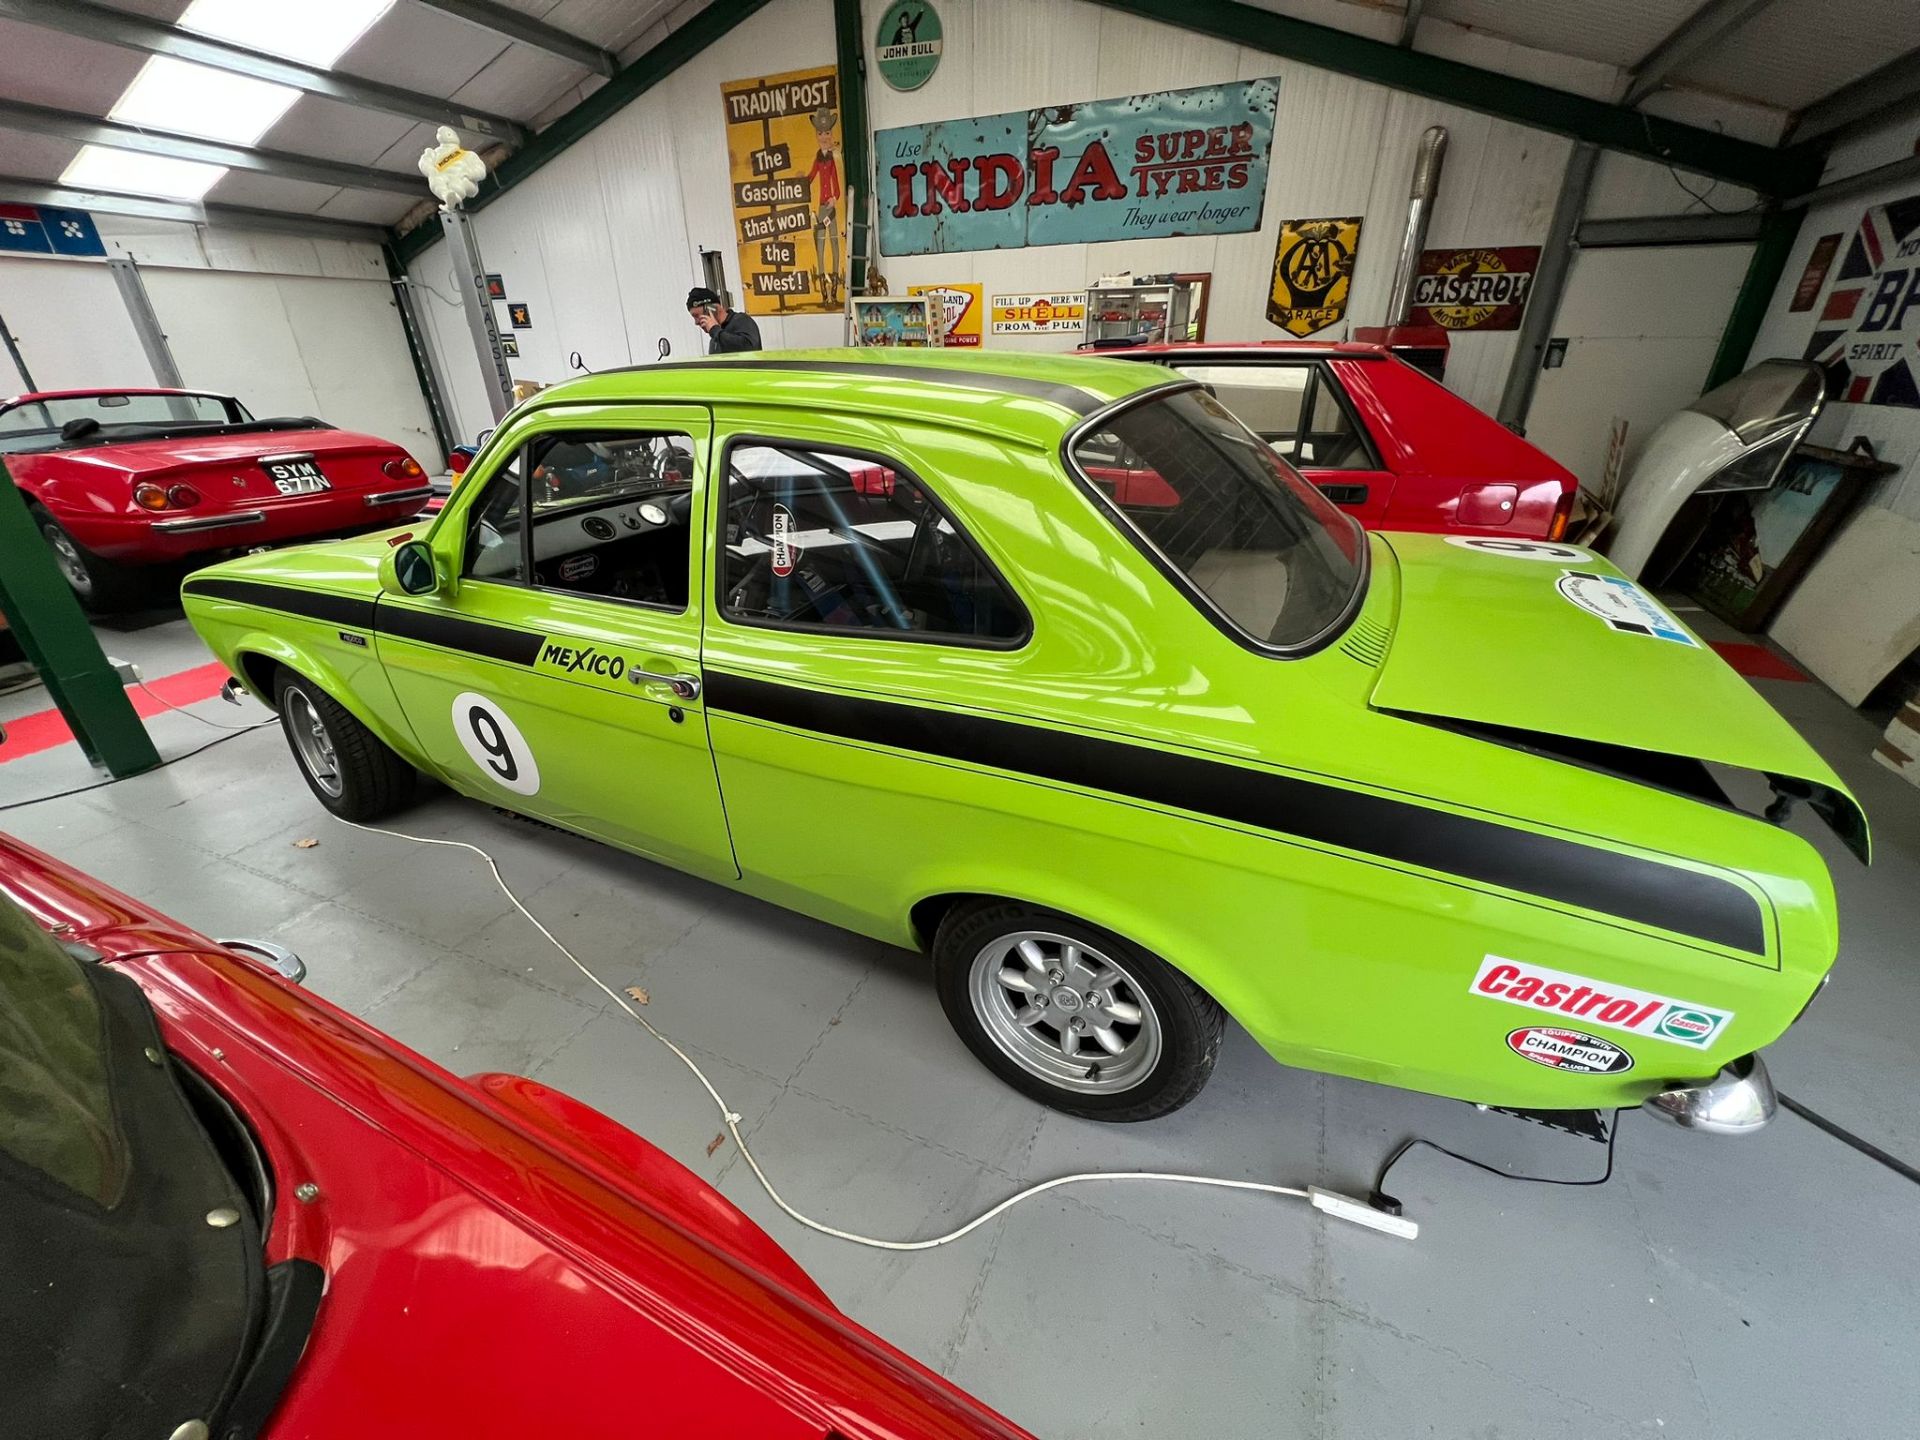 Ford Escort Mk1 X-Sport Mexico Competition Car 1973 - Image 10 of 16